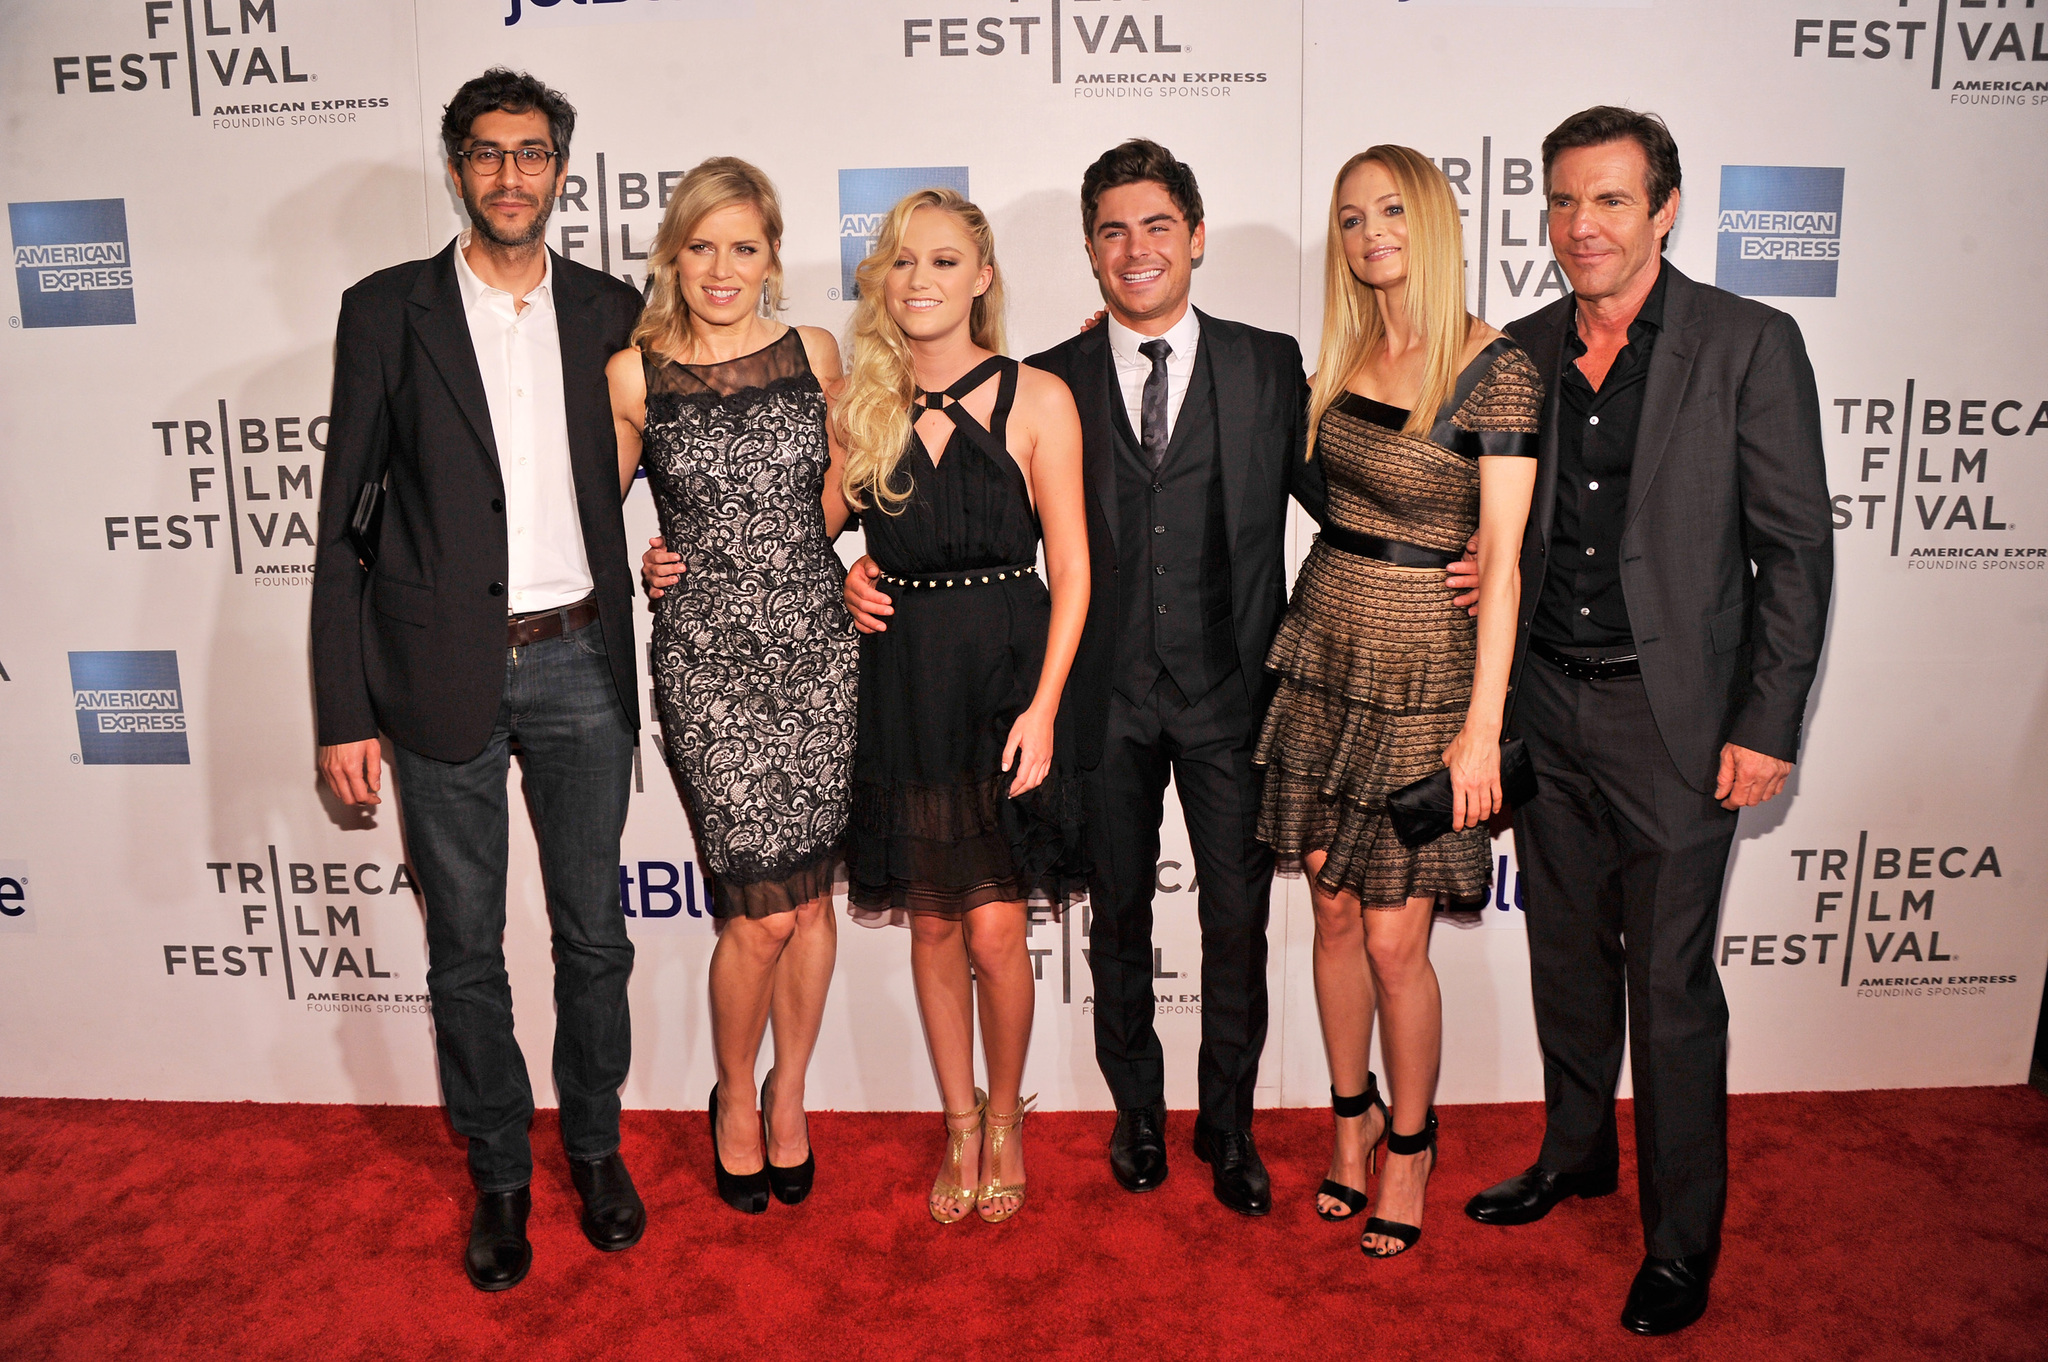 Dennis Quaid, Heather Graham, Kim Dickens, Zac Efron, Maika Monroe and Zineb Oukach at event of At Any Price (2012)